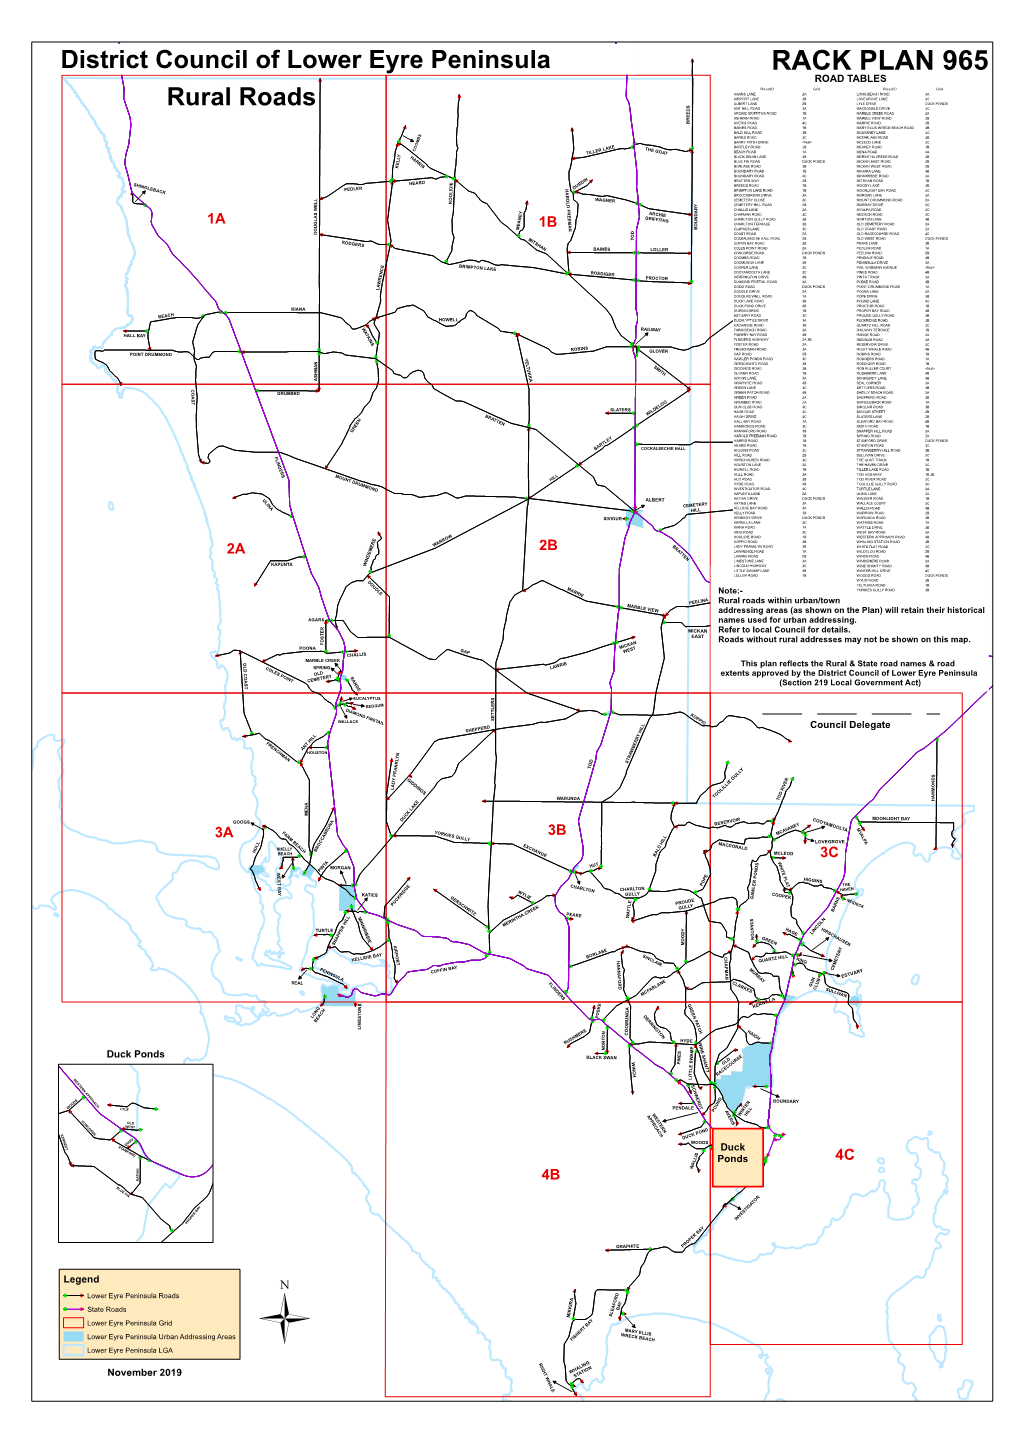 District Council of Lower Eyre Peninsula Rural Roads Rack Plan